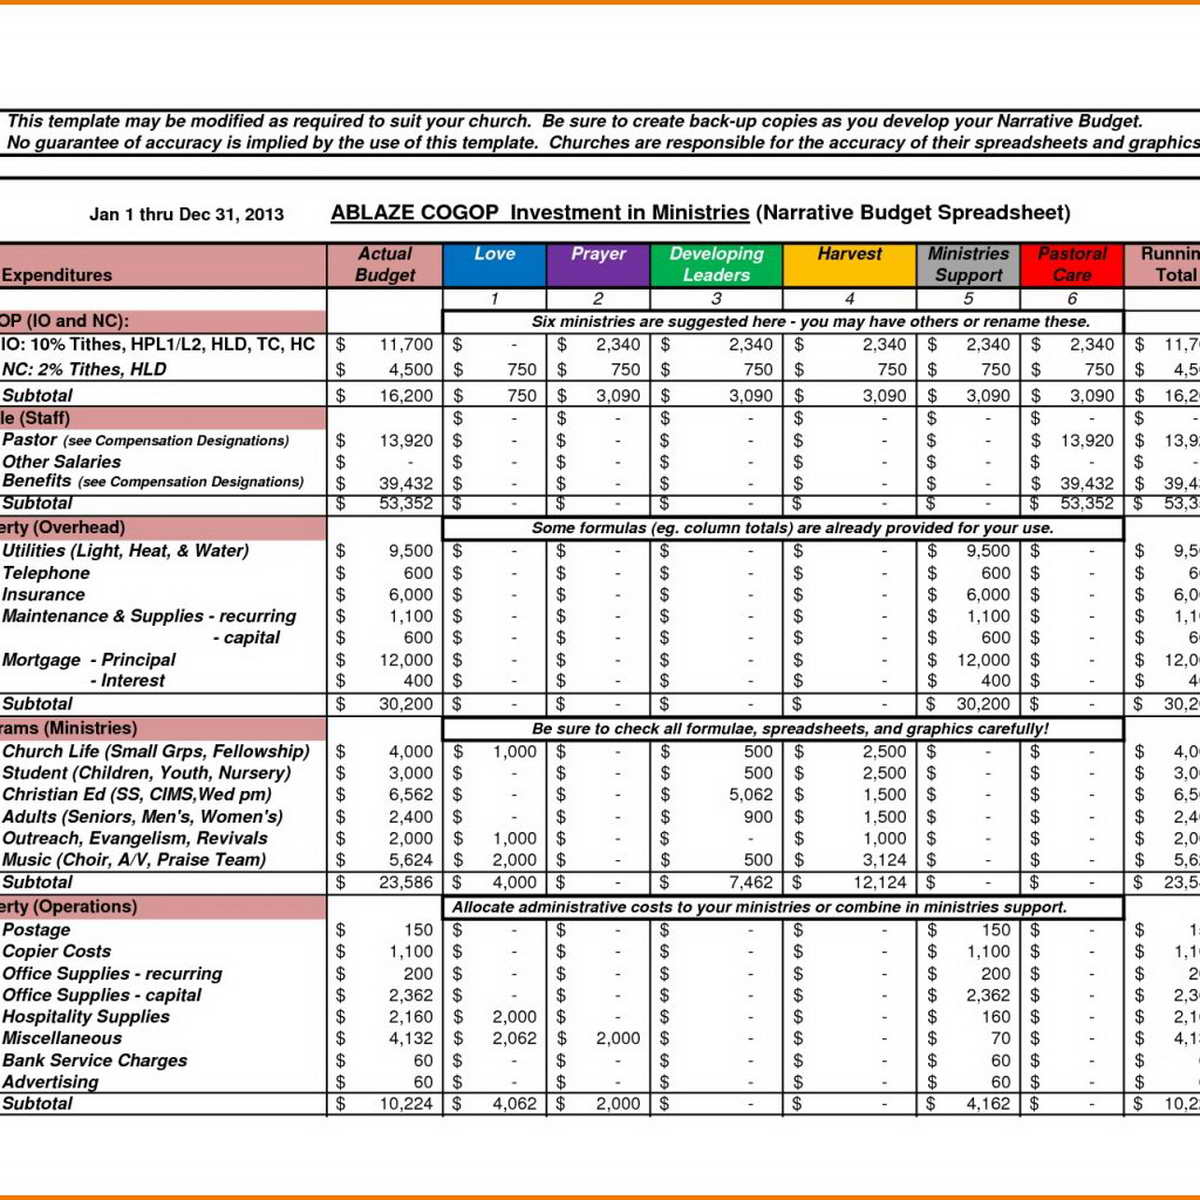 Business Expense Spreadsheet 2018 Inventory Spreadsheet Nfl Weekly Throughout Business Expense Spreadsheet